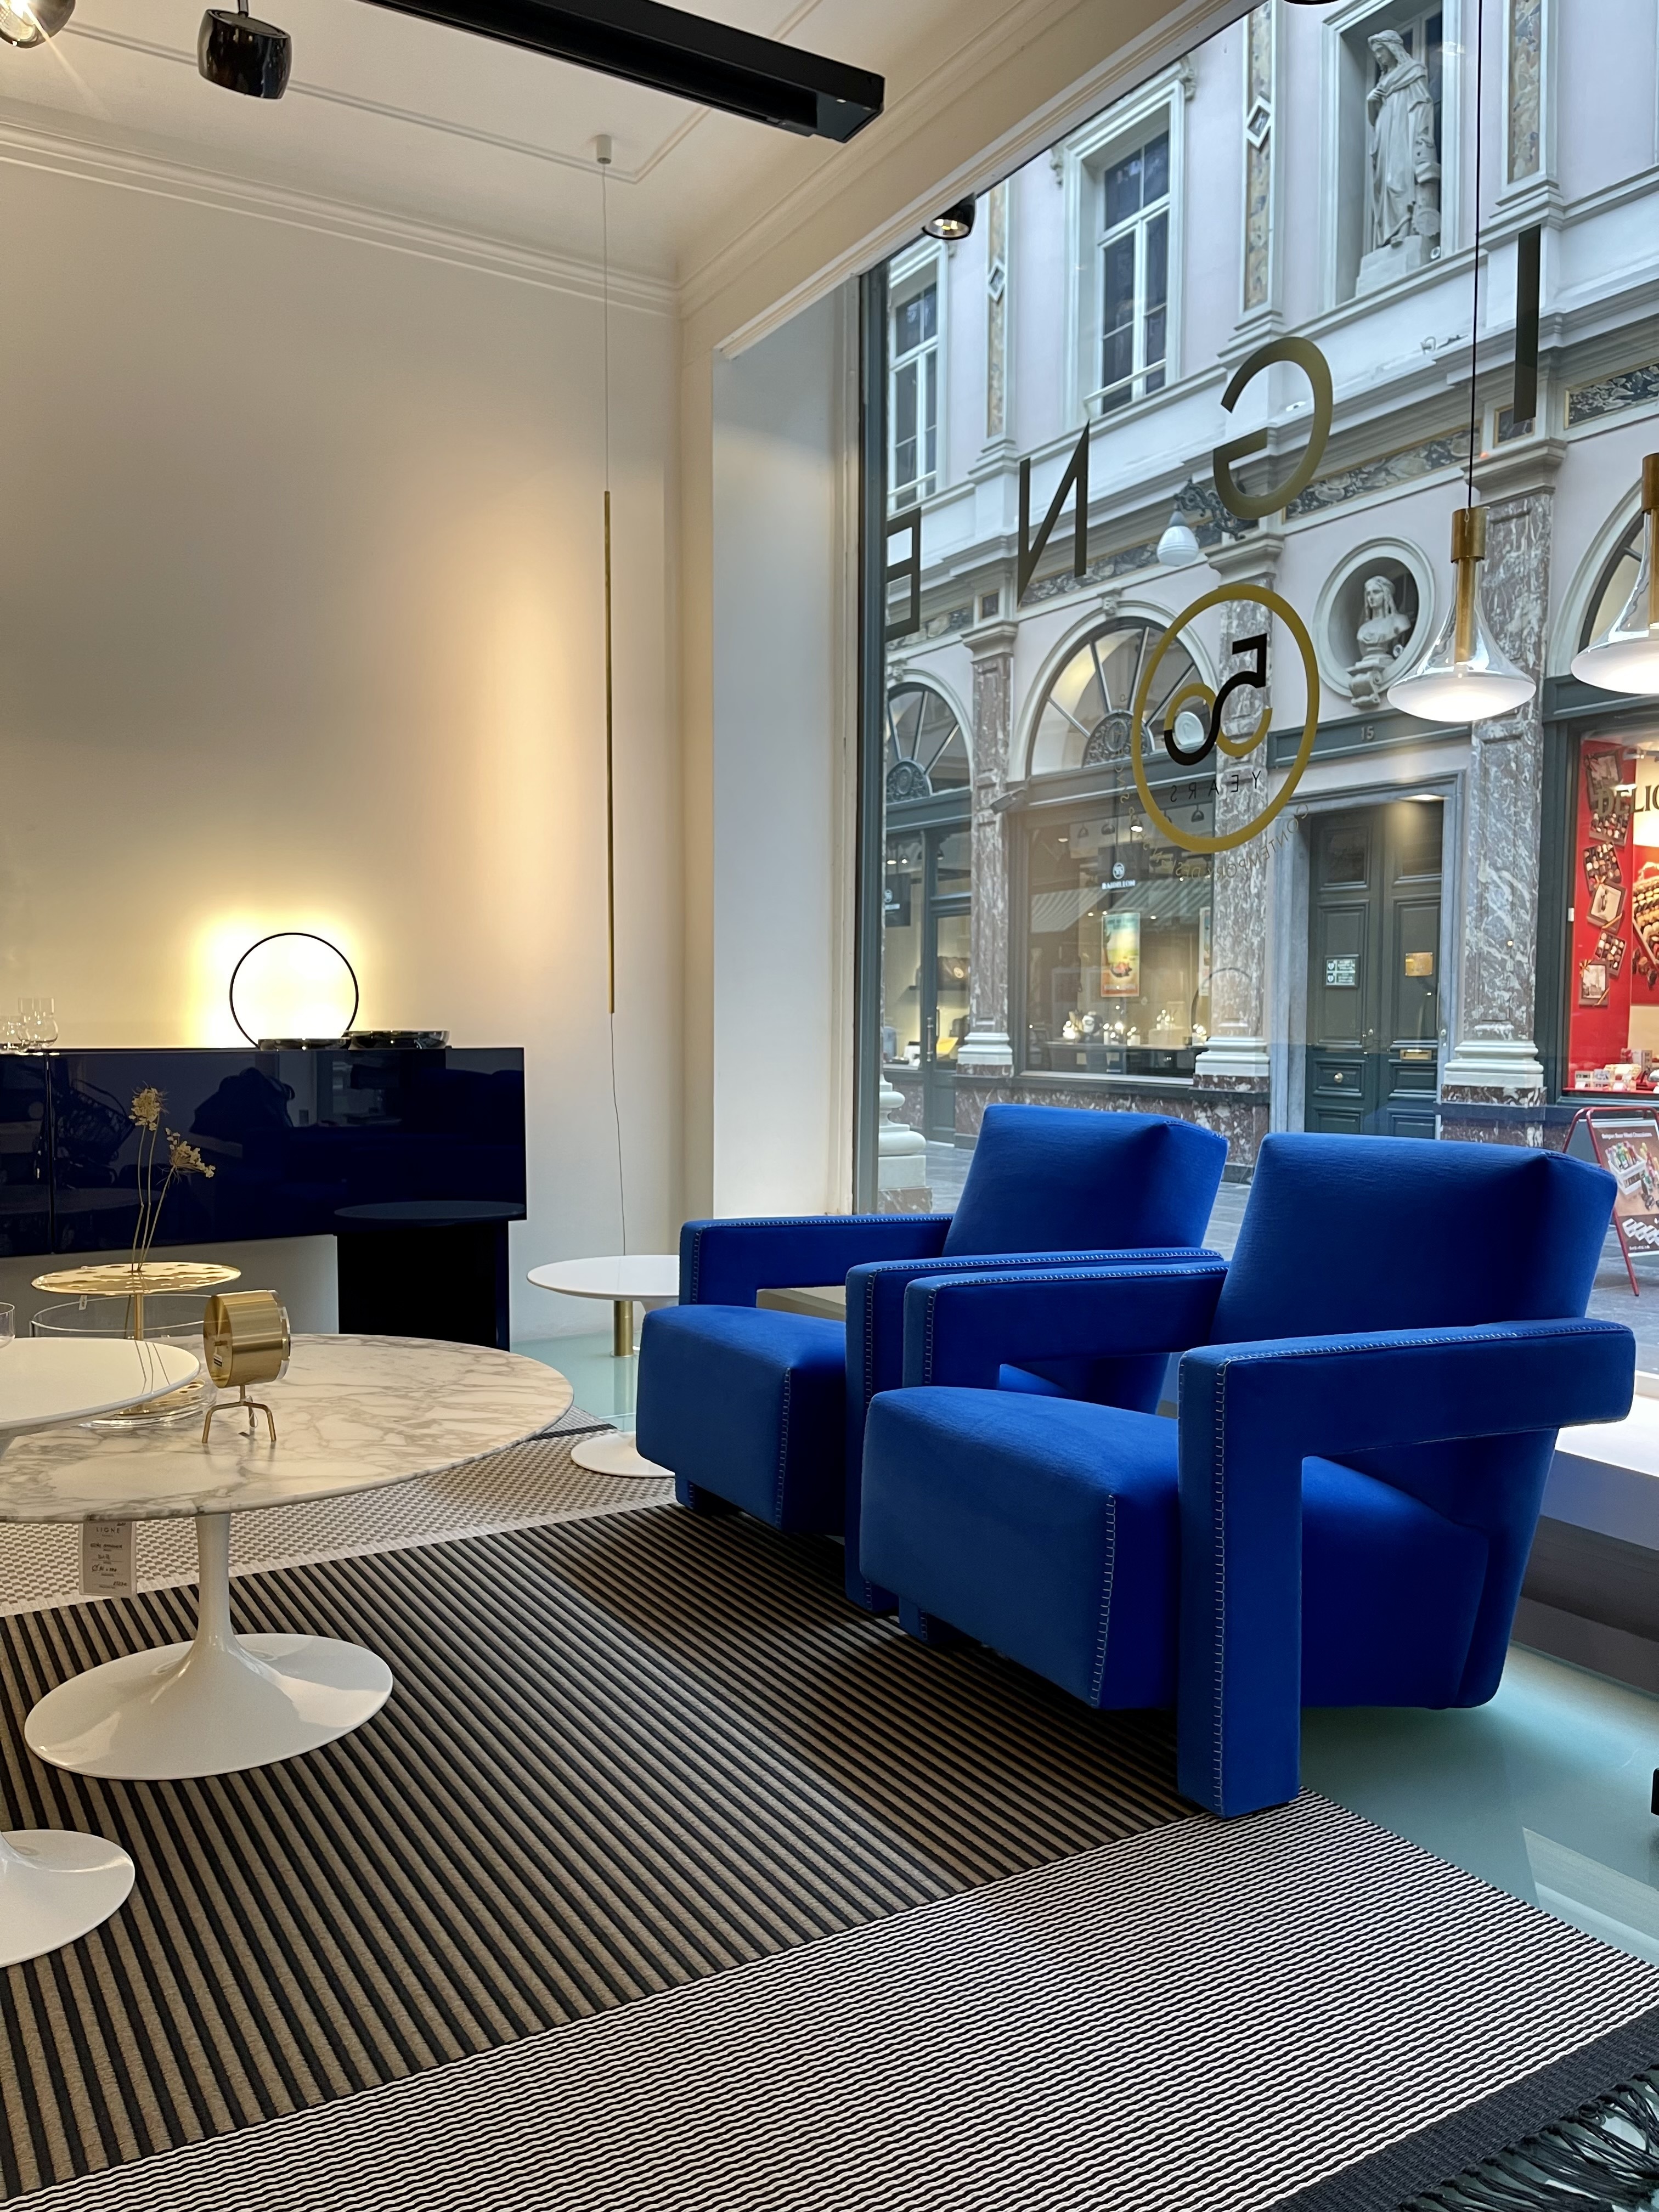 Be welcome at Ligne Showroom in the heart of Brussels to rediscover Cassina